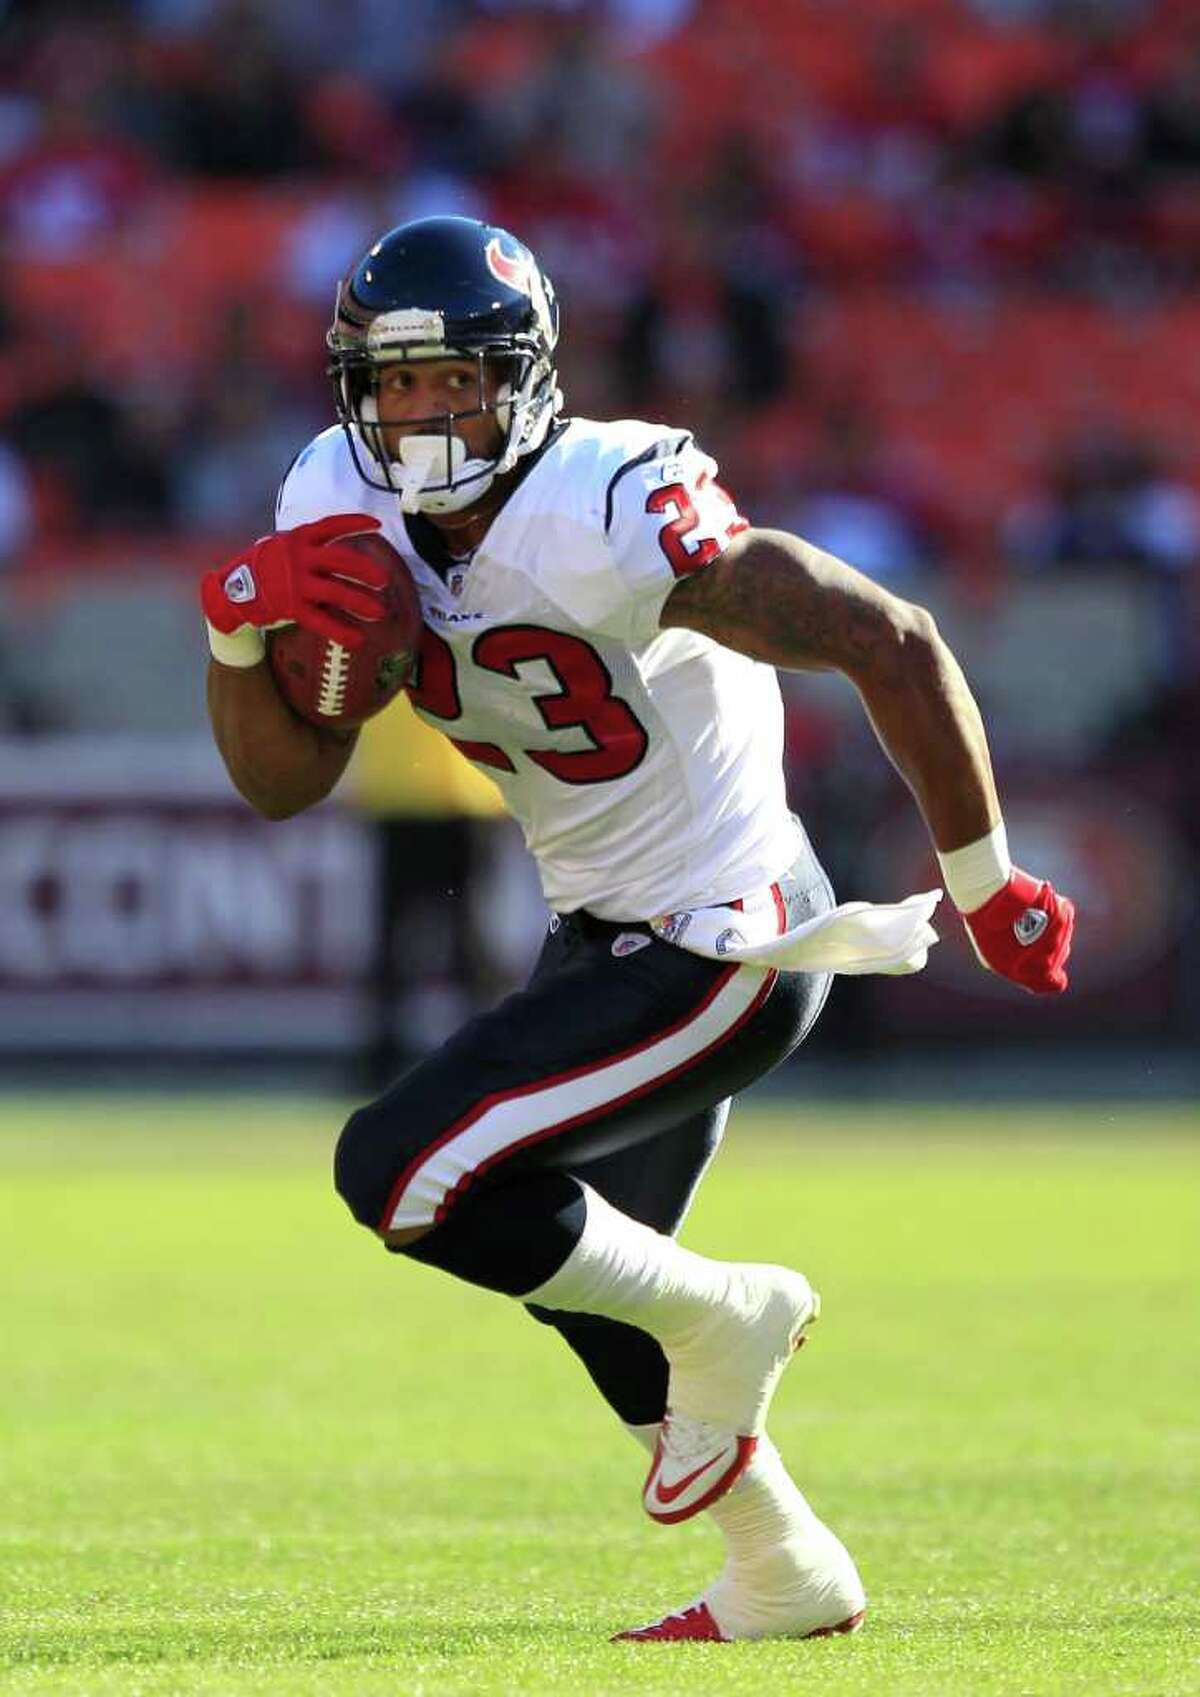 Houston Texans running back Arian Foster (23) runs against the San Francisco 49ers in the first quarter of a preseason NFL football game in San Francisco, Saturday, Aug. 27, 2011. (AP Photo/Marcio Jose Sanchez)